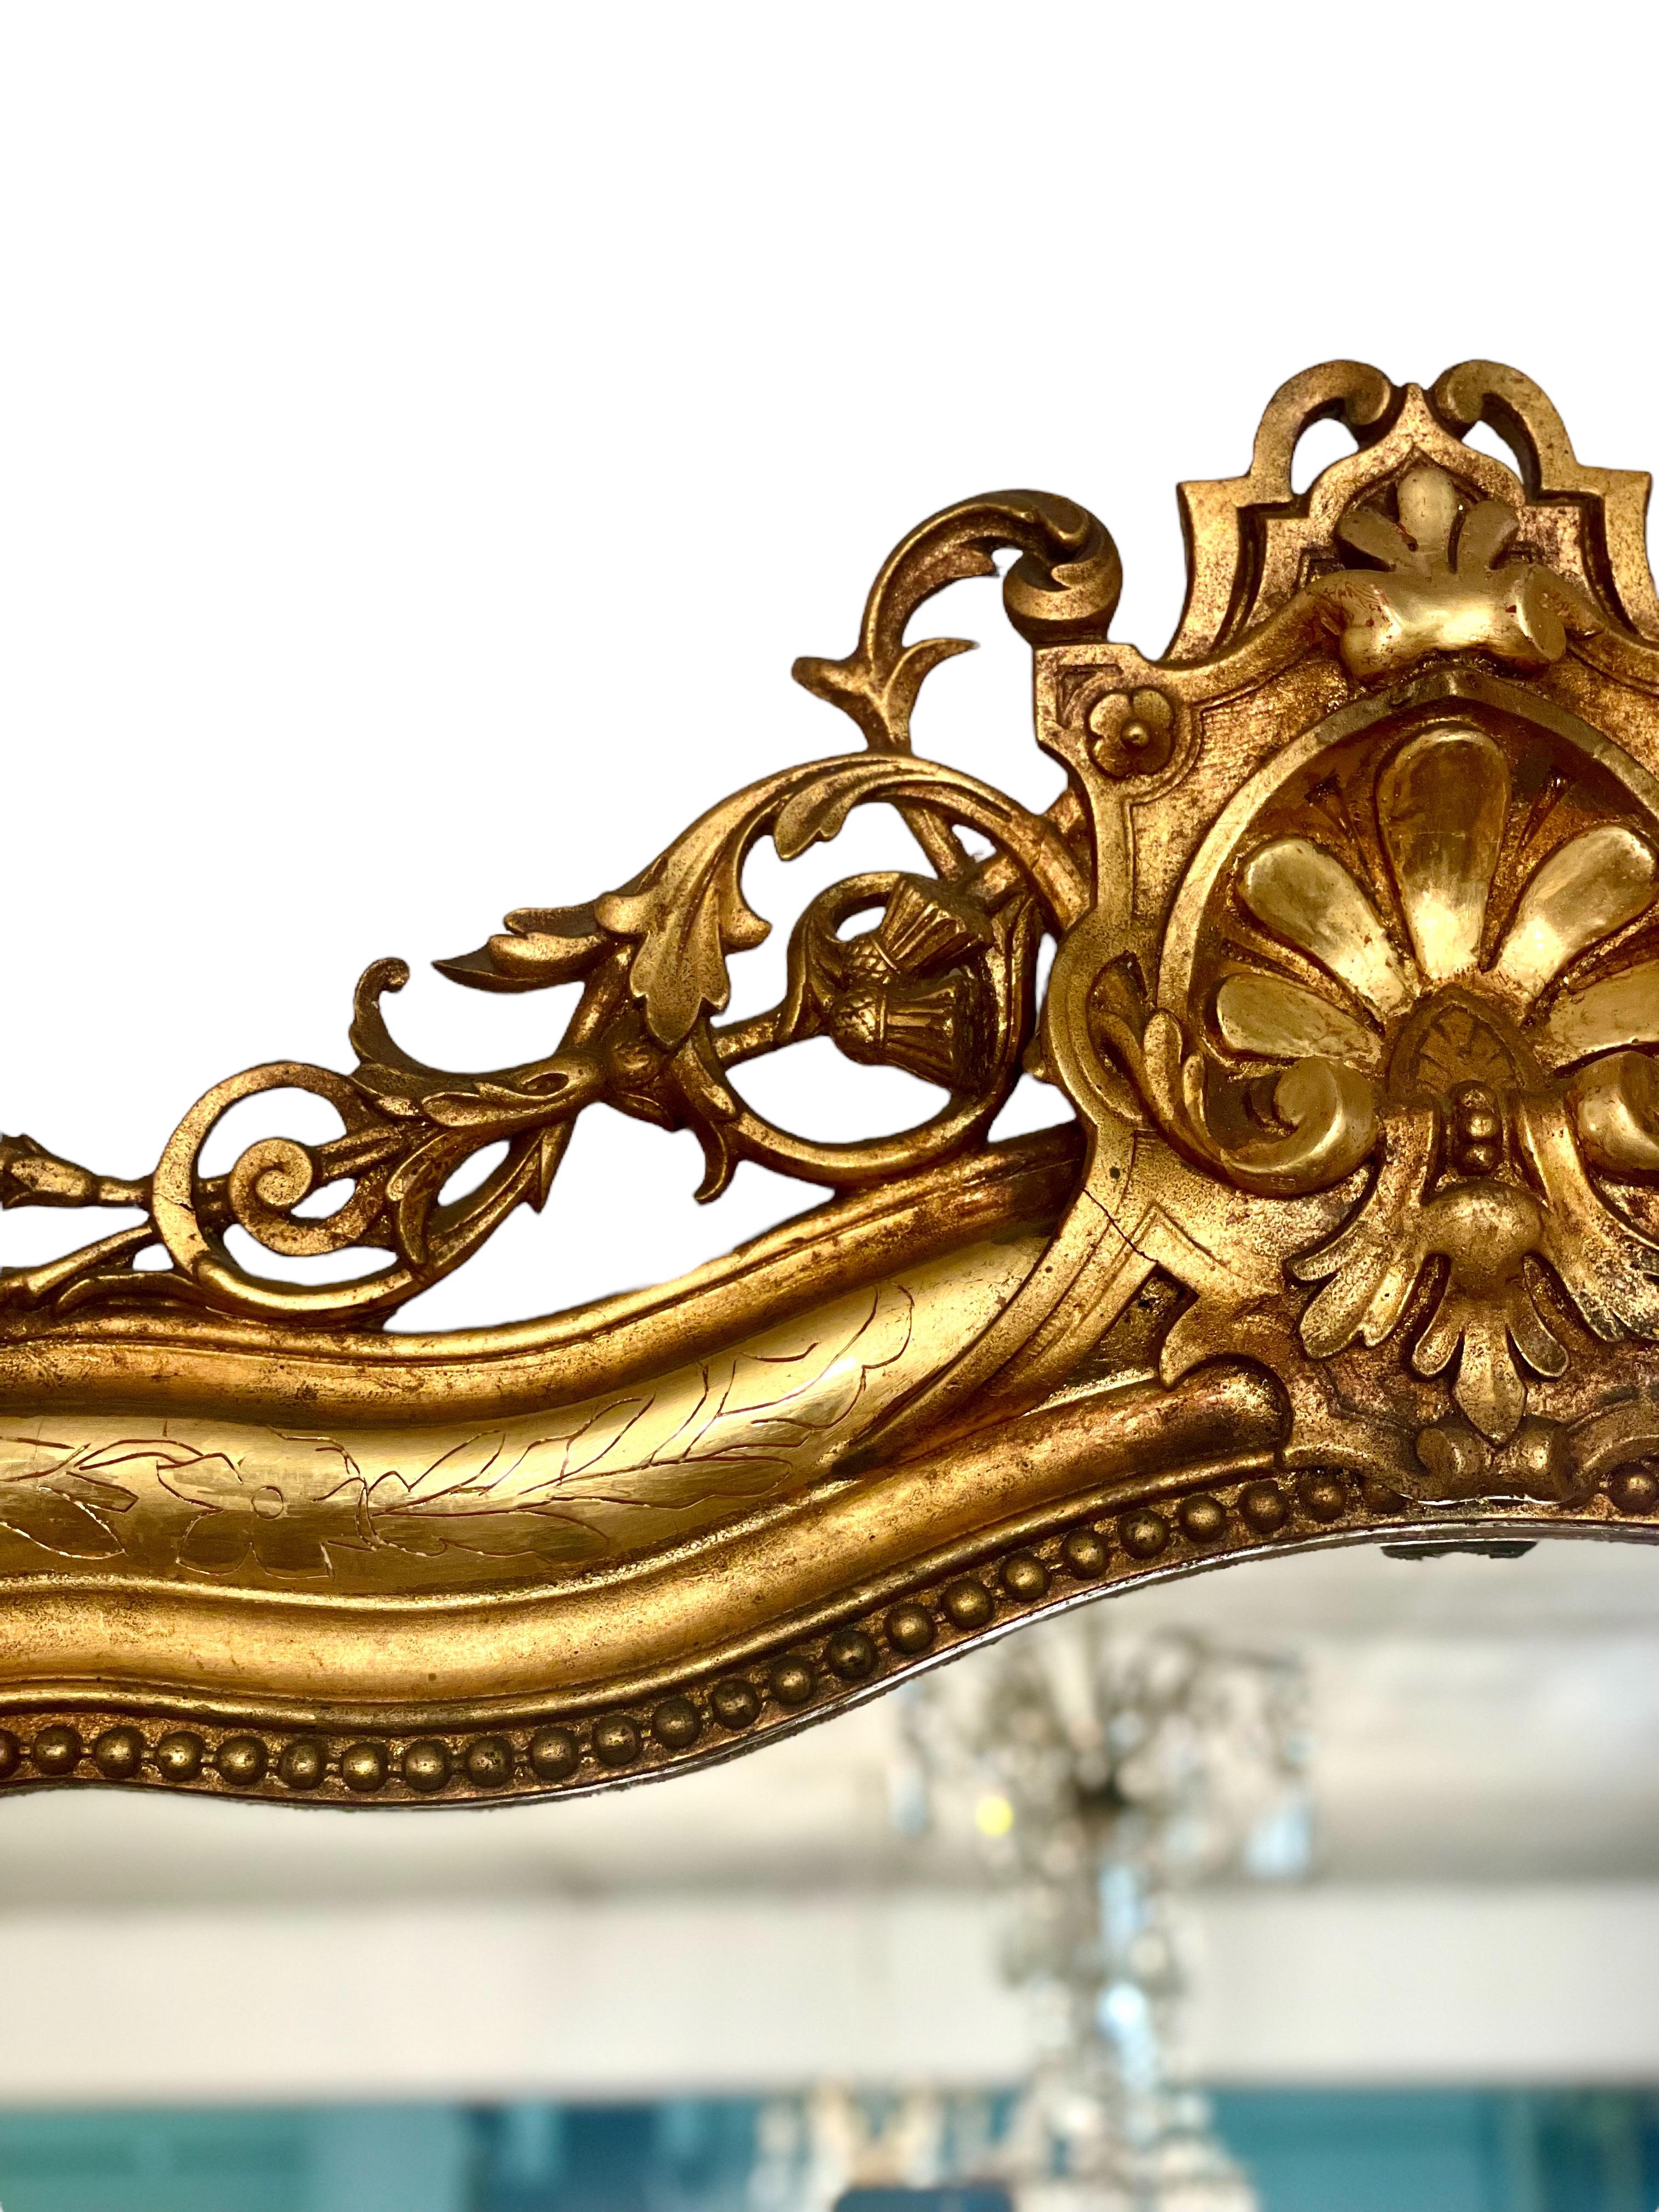 A magnificent late 19th century Louis XV style gilt overmantel mirror, in wood and gilded stucco, with string-of-pearls beading to the interior perimeter, and a tumbling openwork cartouche. This beautiful mirror features a wonderfully sleek, fluted